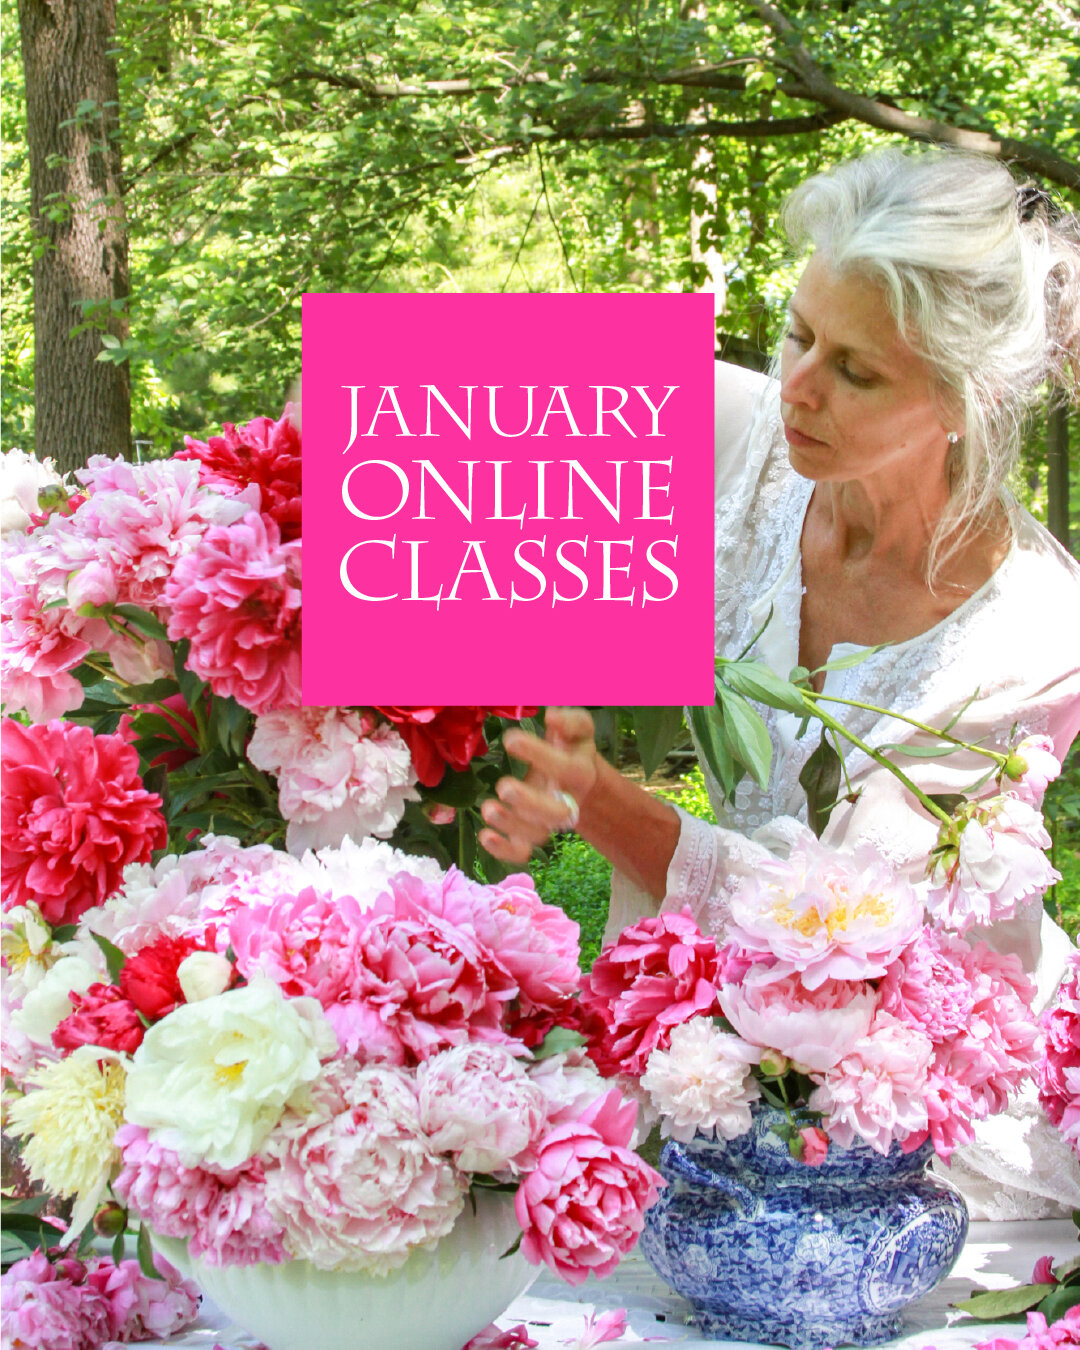 New at Peony's Envy - each month, we will bring you online classes to complement what is happening during that month in the World of Peonies. These classes will cover a single topic in more depth than our Free Online Forums. Now is the time to prepar